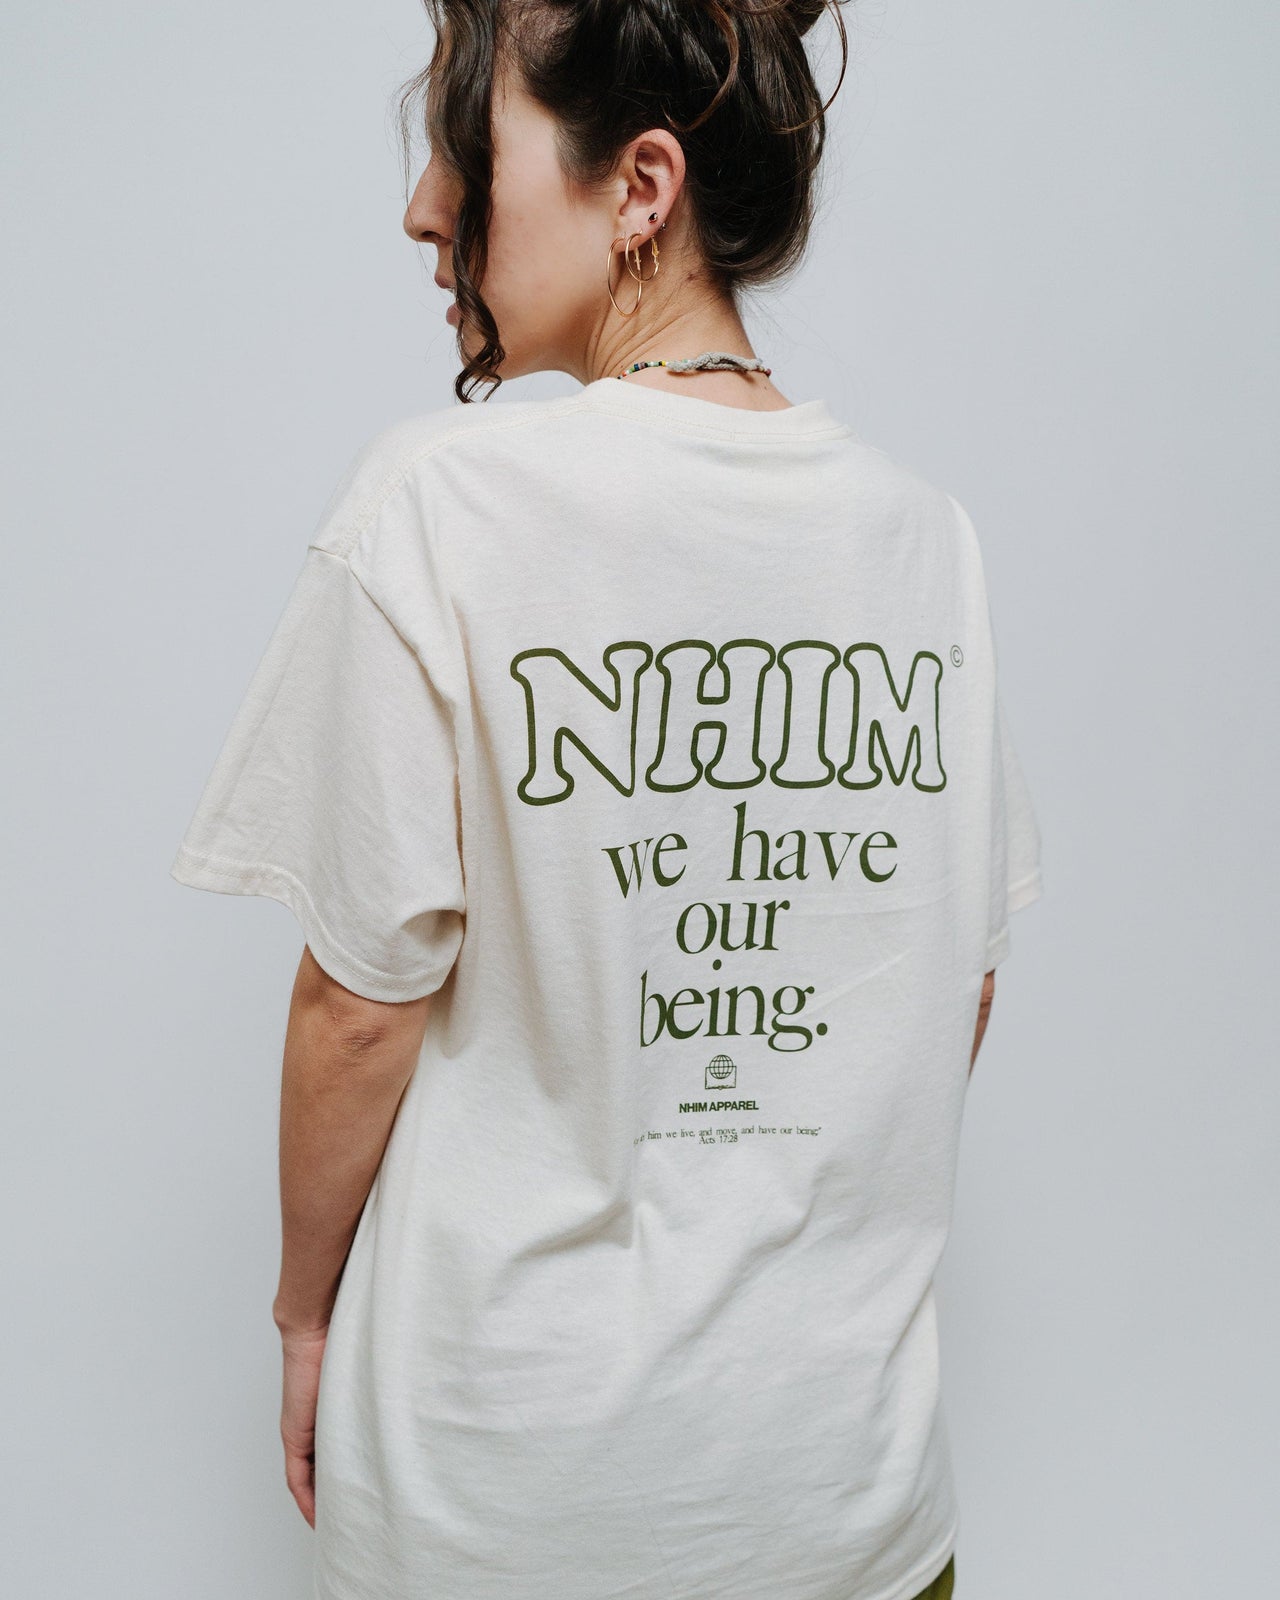 NHIM We have our being natural shirt by NHIM apparel christian clothing brand The name "NHIM" comes from Acts 17:28: “For in Him we live and move and have our being". A collection inspired by our beginnings. Made in the USA